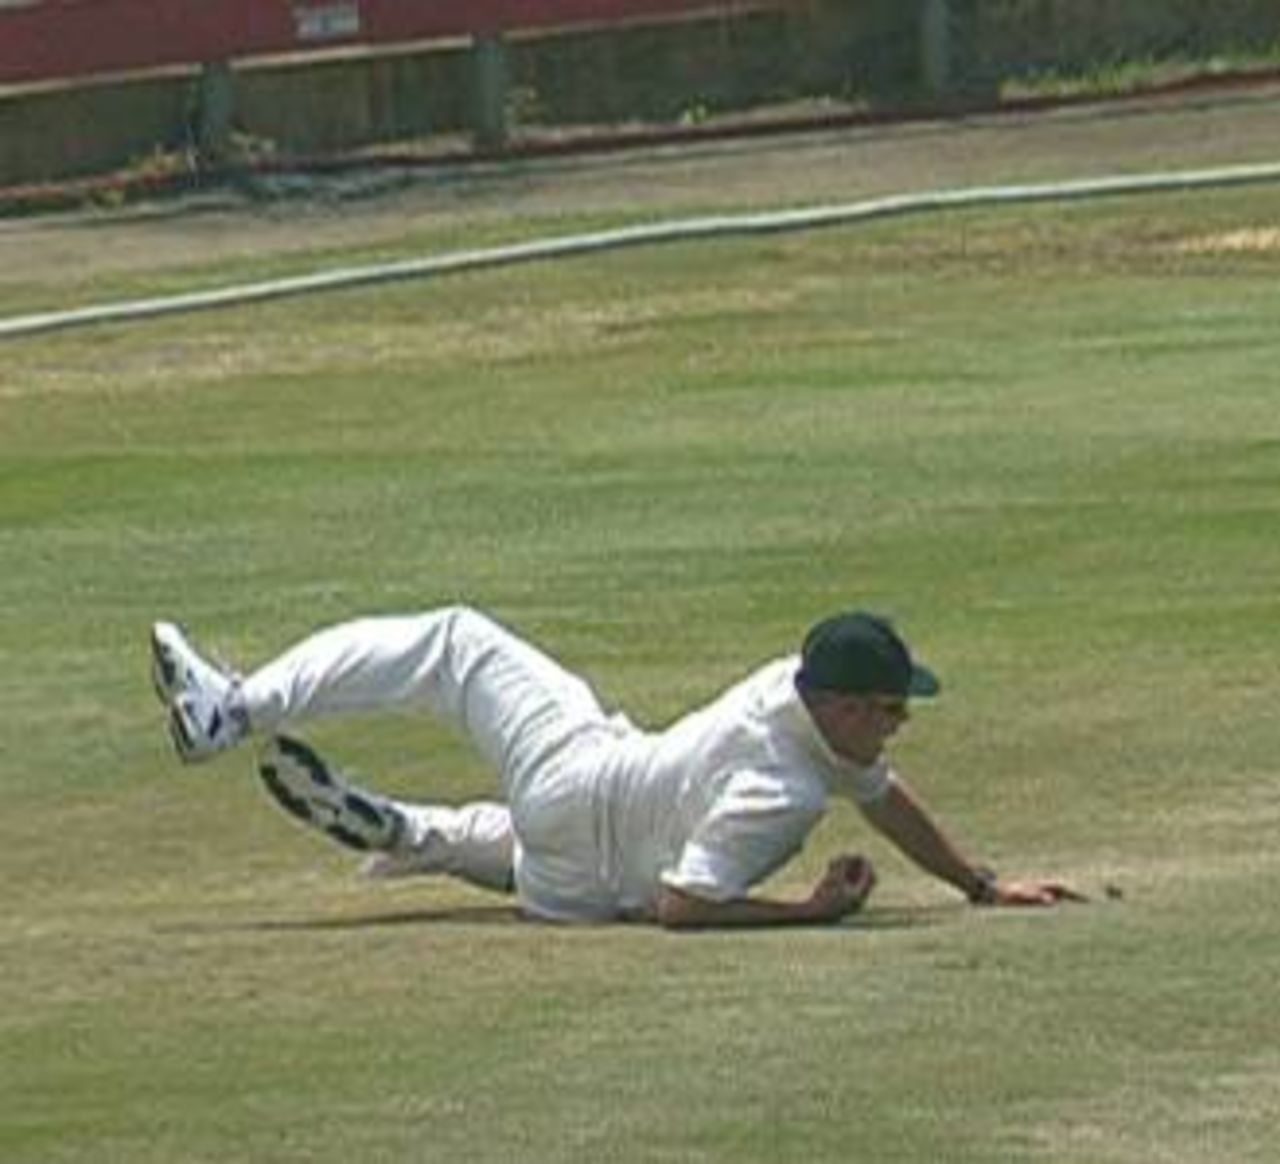 Clive Eksteen takes a diving catch to dismiss Jimmy Adams for 10 during the second "Test" between South Africa A and West Indies A at Buffalo Park, East London, 19-22 Dec 1997. The bowler was Roger Telemachus.